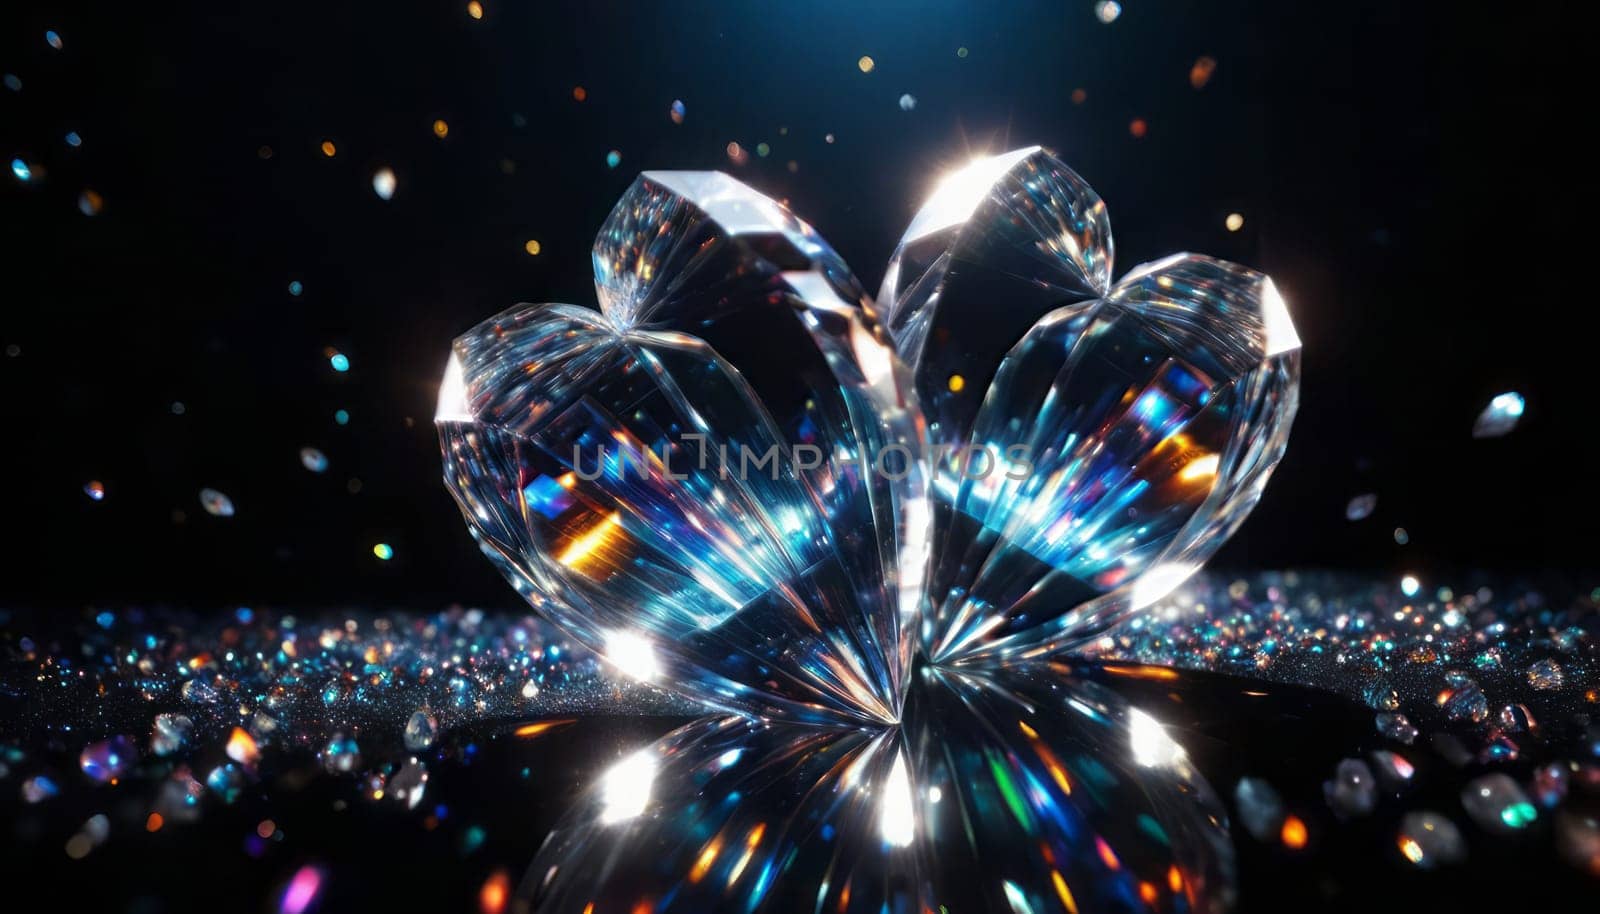 two diamond faceted hearts, crystal's, translucent, transparent, close-up with deep depth of field Valentine's realistic two hearts detailed background, transparent colors of the rainbow hearts, against a transparent scattering crystals, falling crystals, glints in the foreground